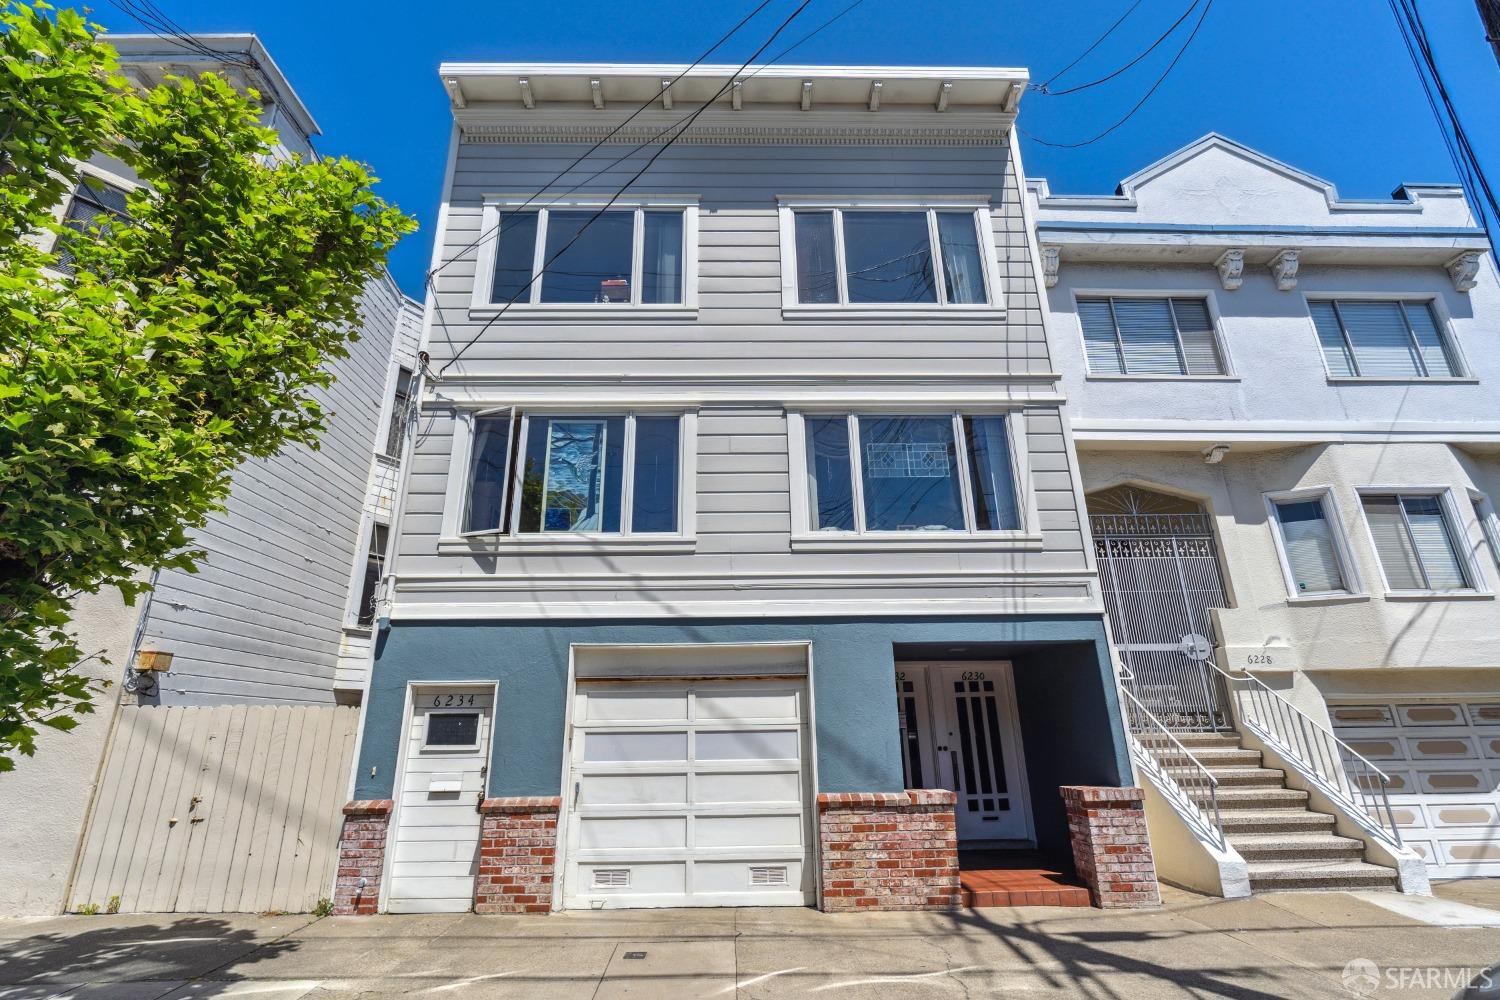 TWO - 2 Bedroom | Sunroom | 1 Bathroom | Formal Dining Room | Living Room | Laundry Room ONE -1 Bedroom | 1 Bathroom | Dining Room | Yard Access. All Tenants claiming protected status and subject to tenants rights.